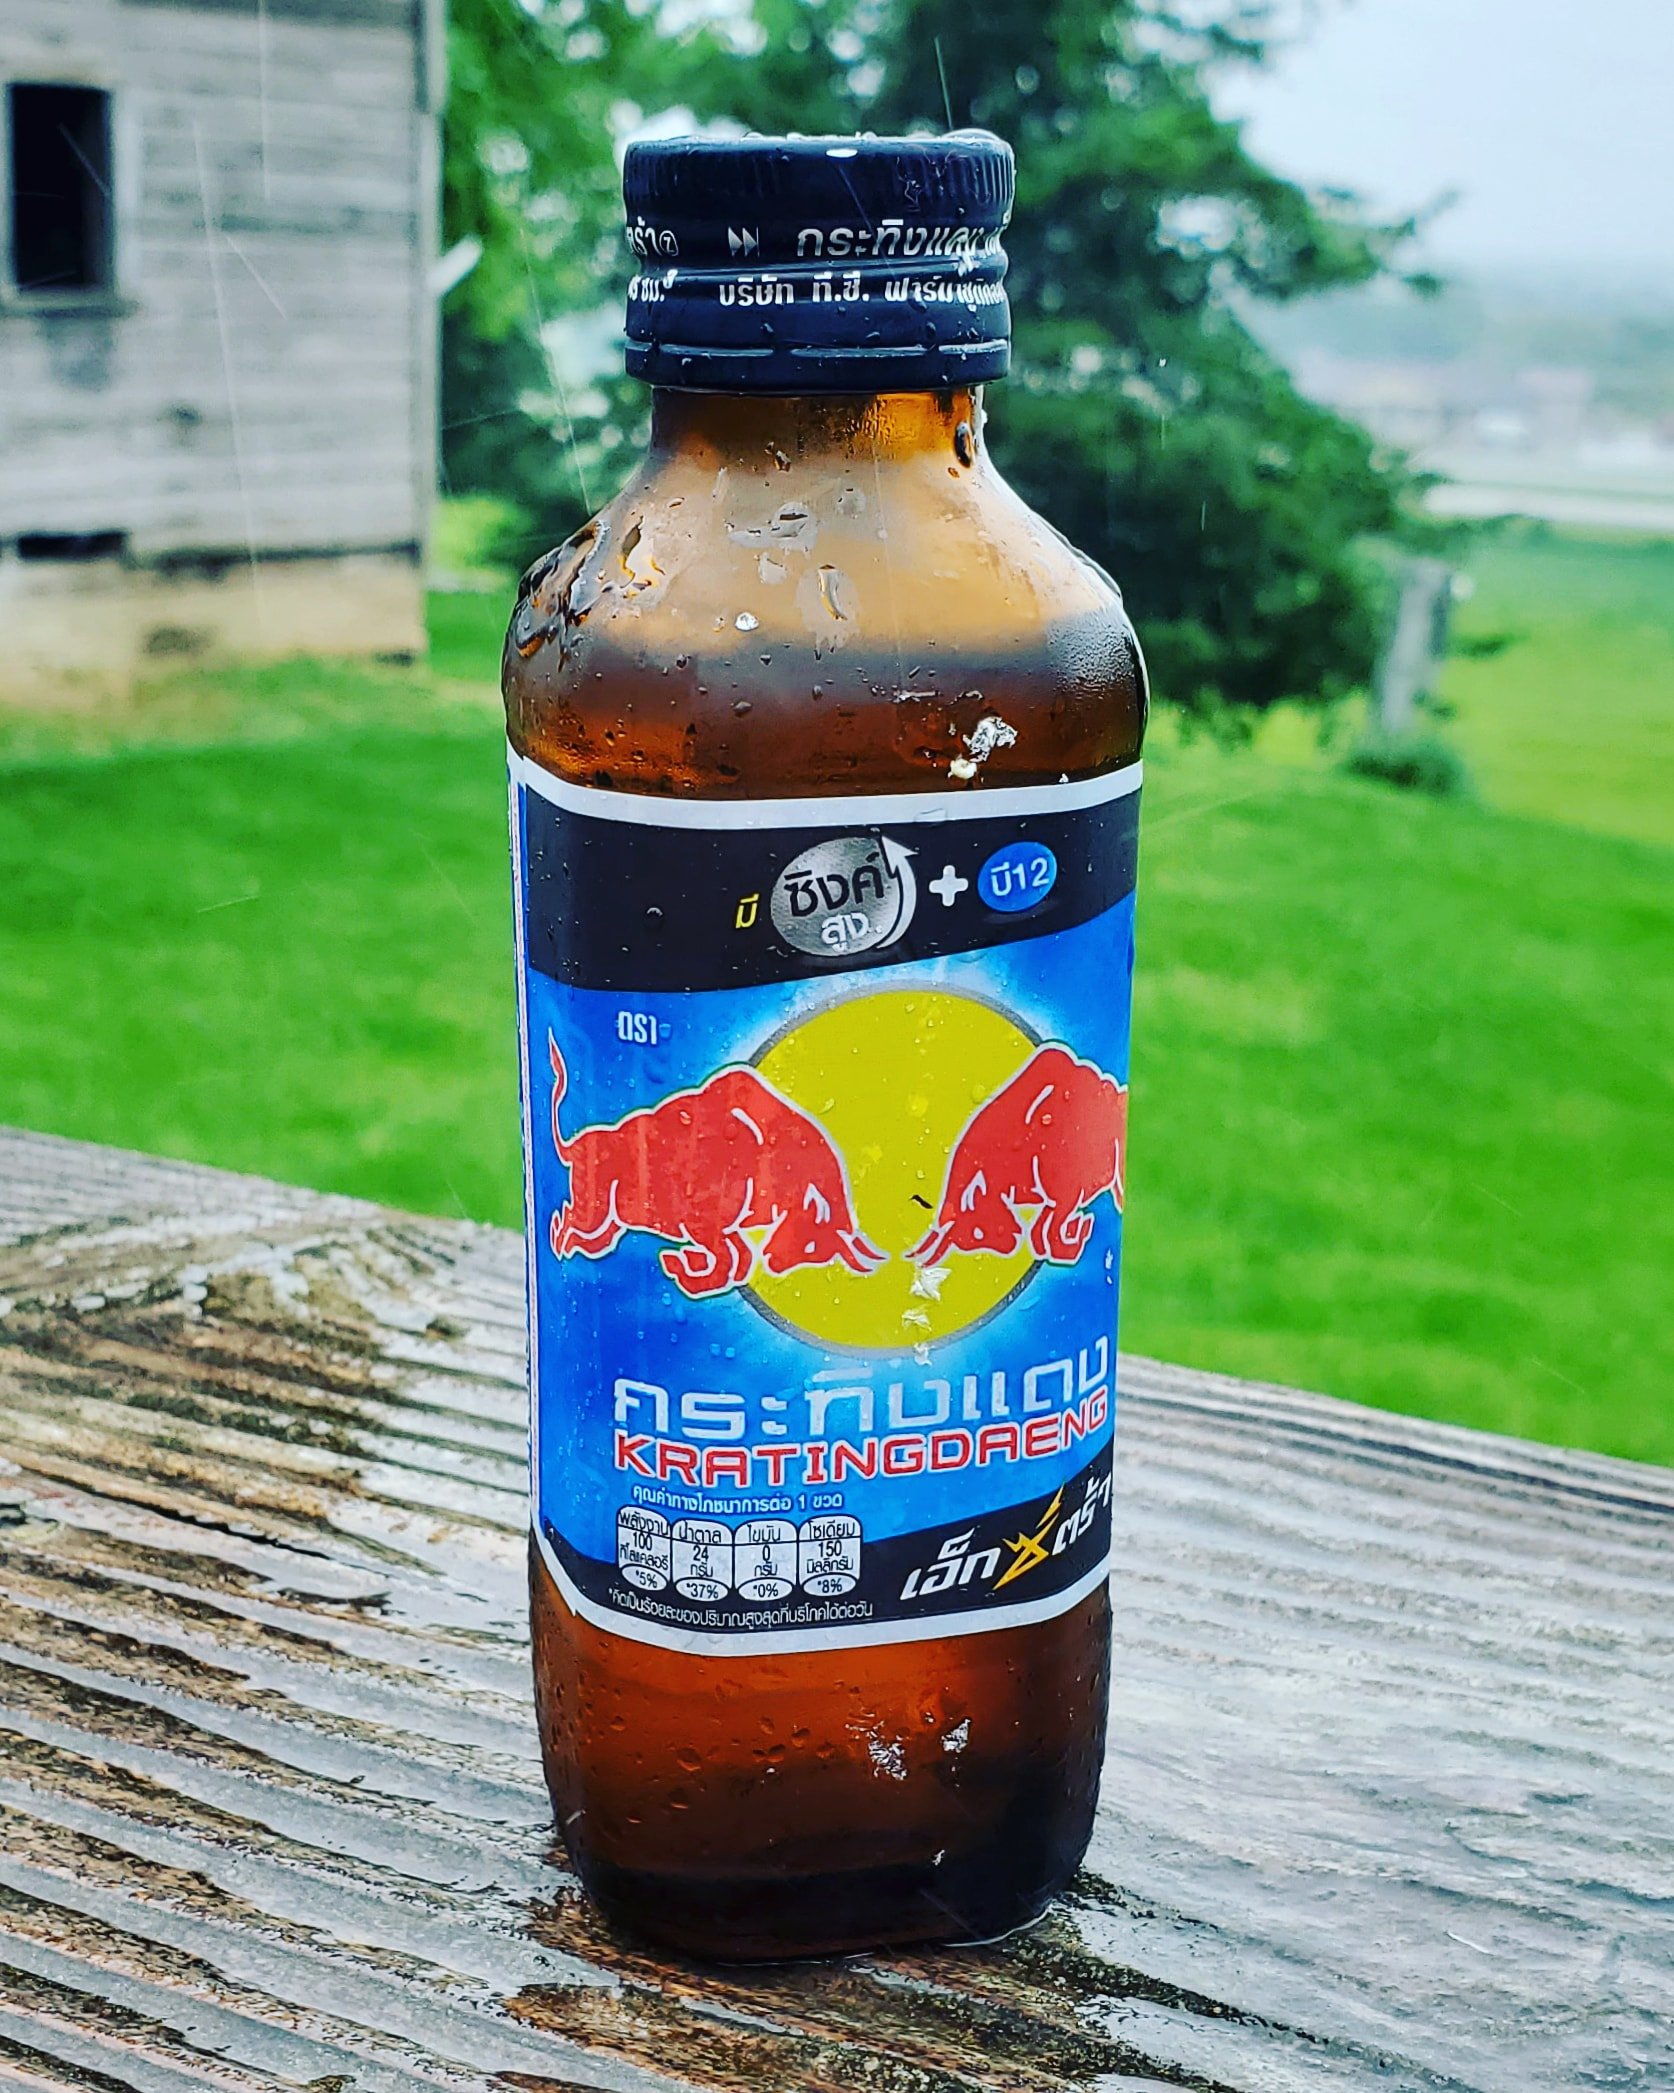 O. on Twitter: "-Trying some #KratingDaeng (#RedBull) from Thailand. Krating Daeng was created in #Thailand in 1975. Krating Daeng is the basis for what western countries know as Red Bull today.